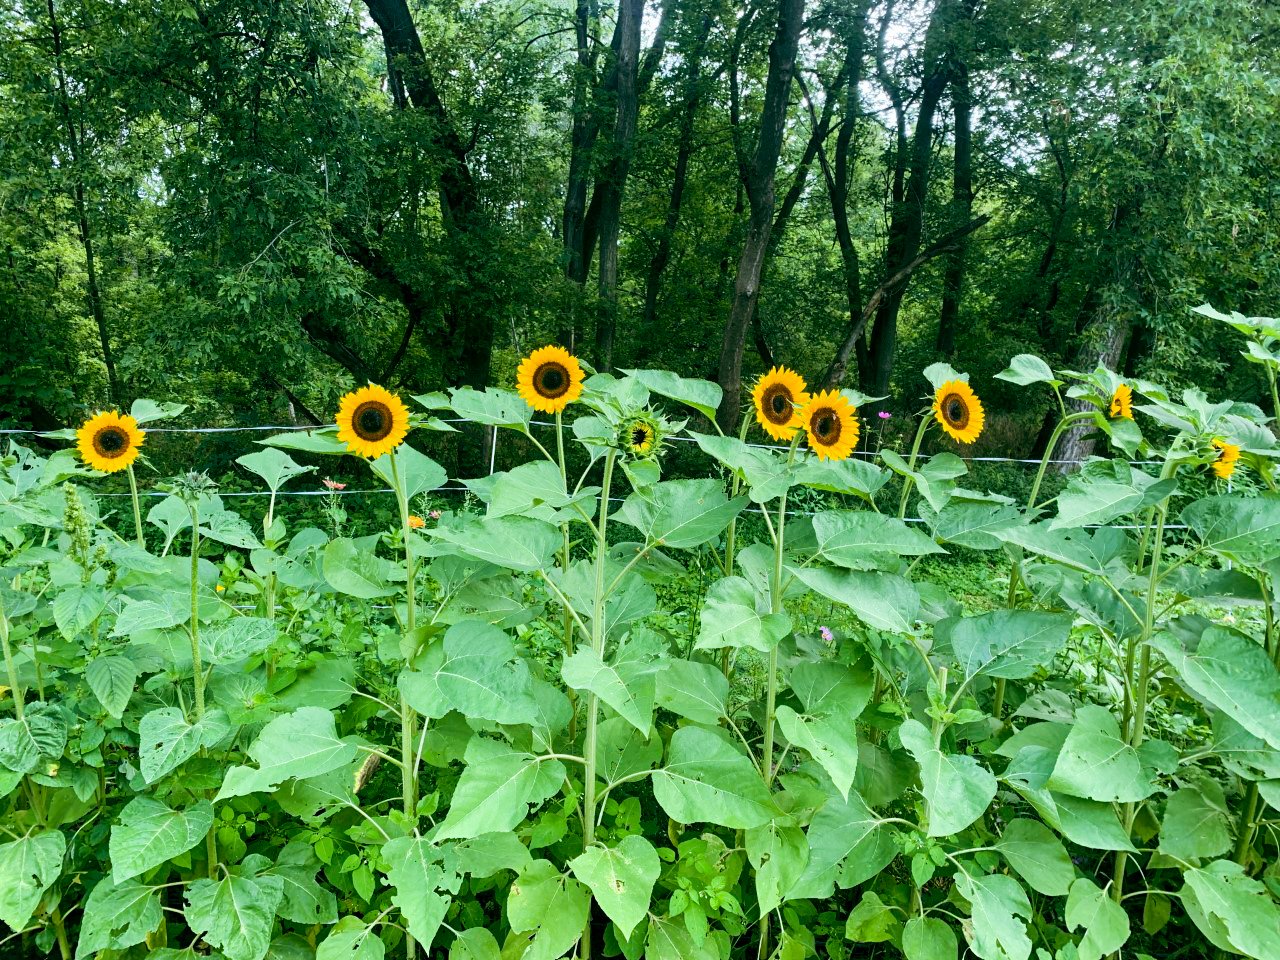 Sunflowers at People's Garden